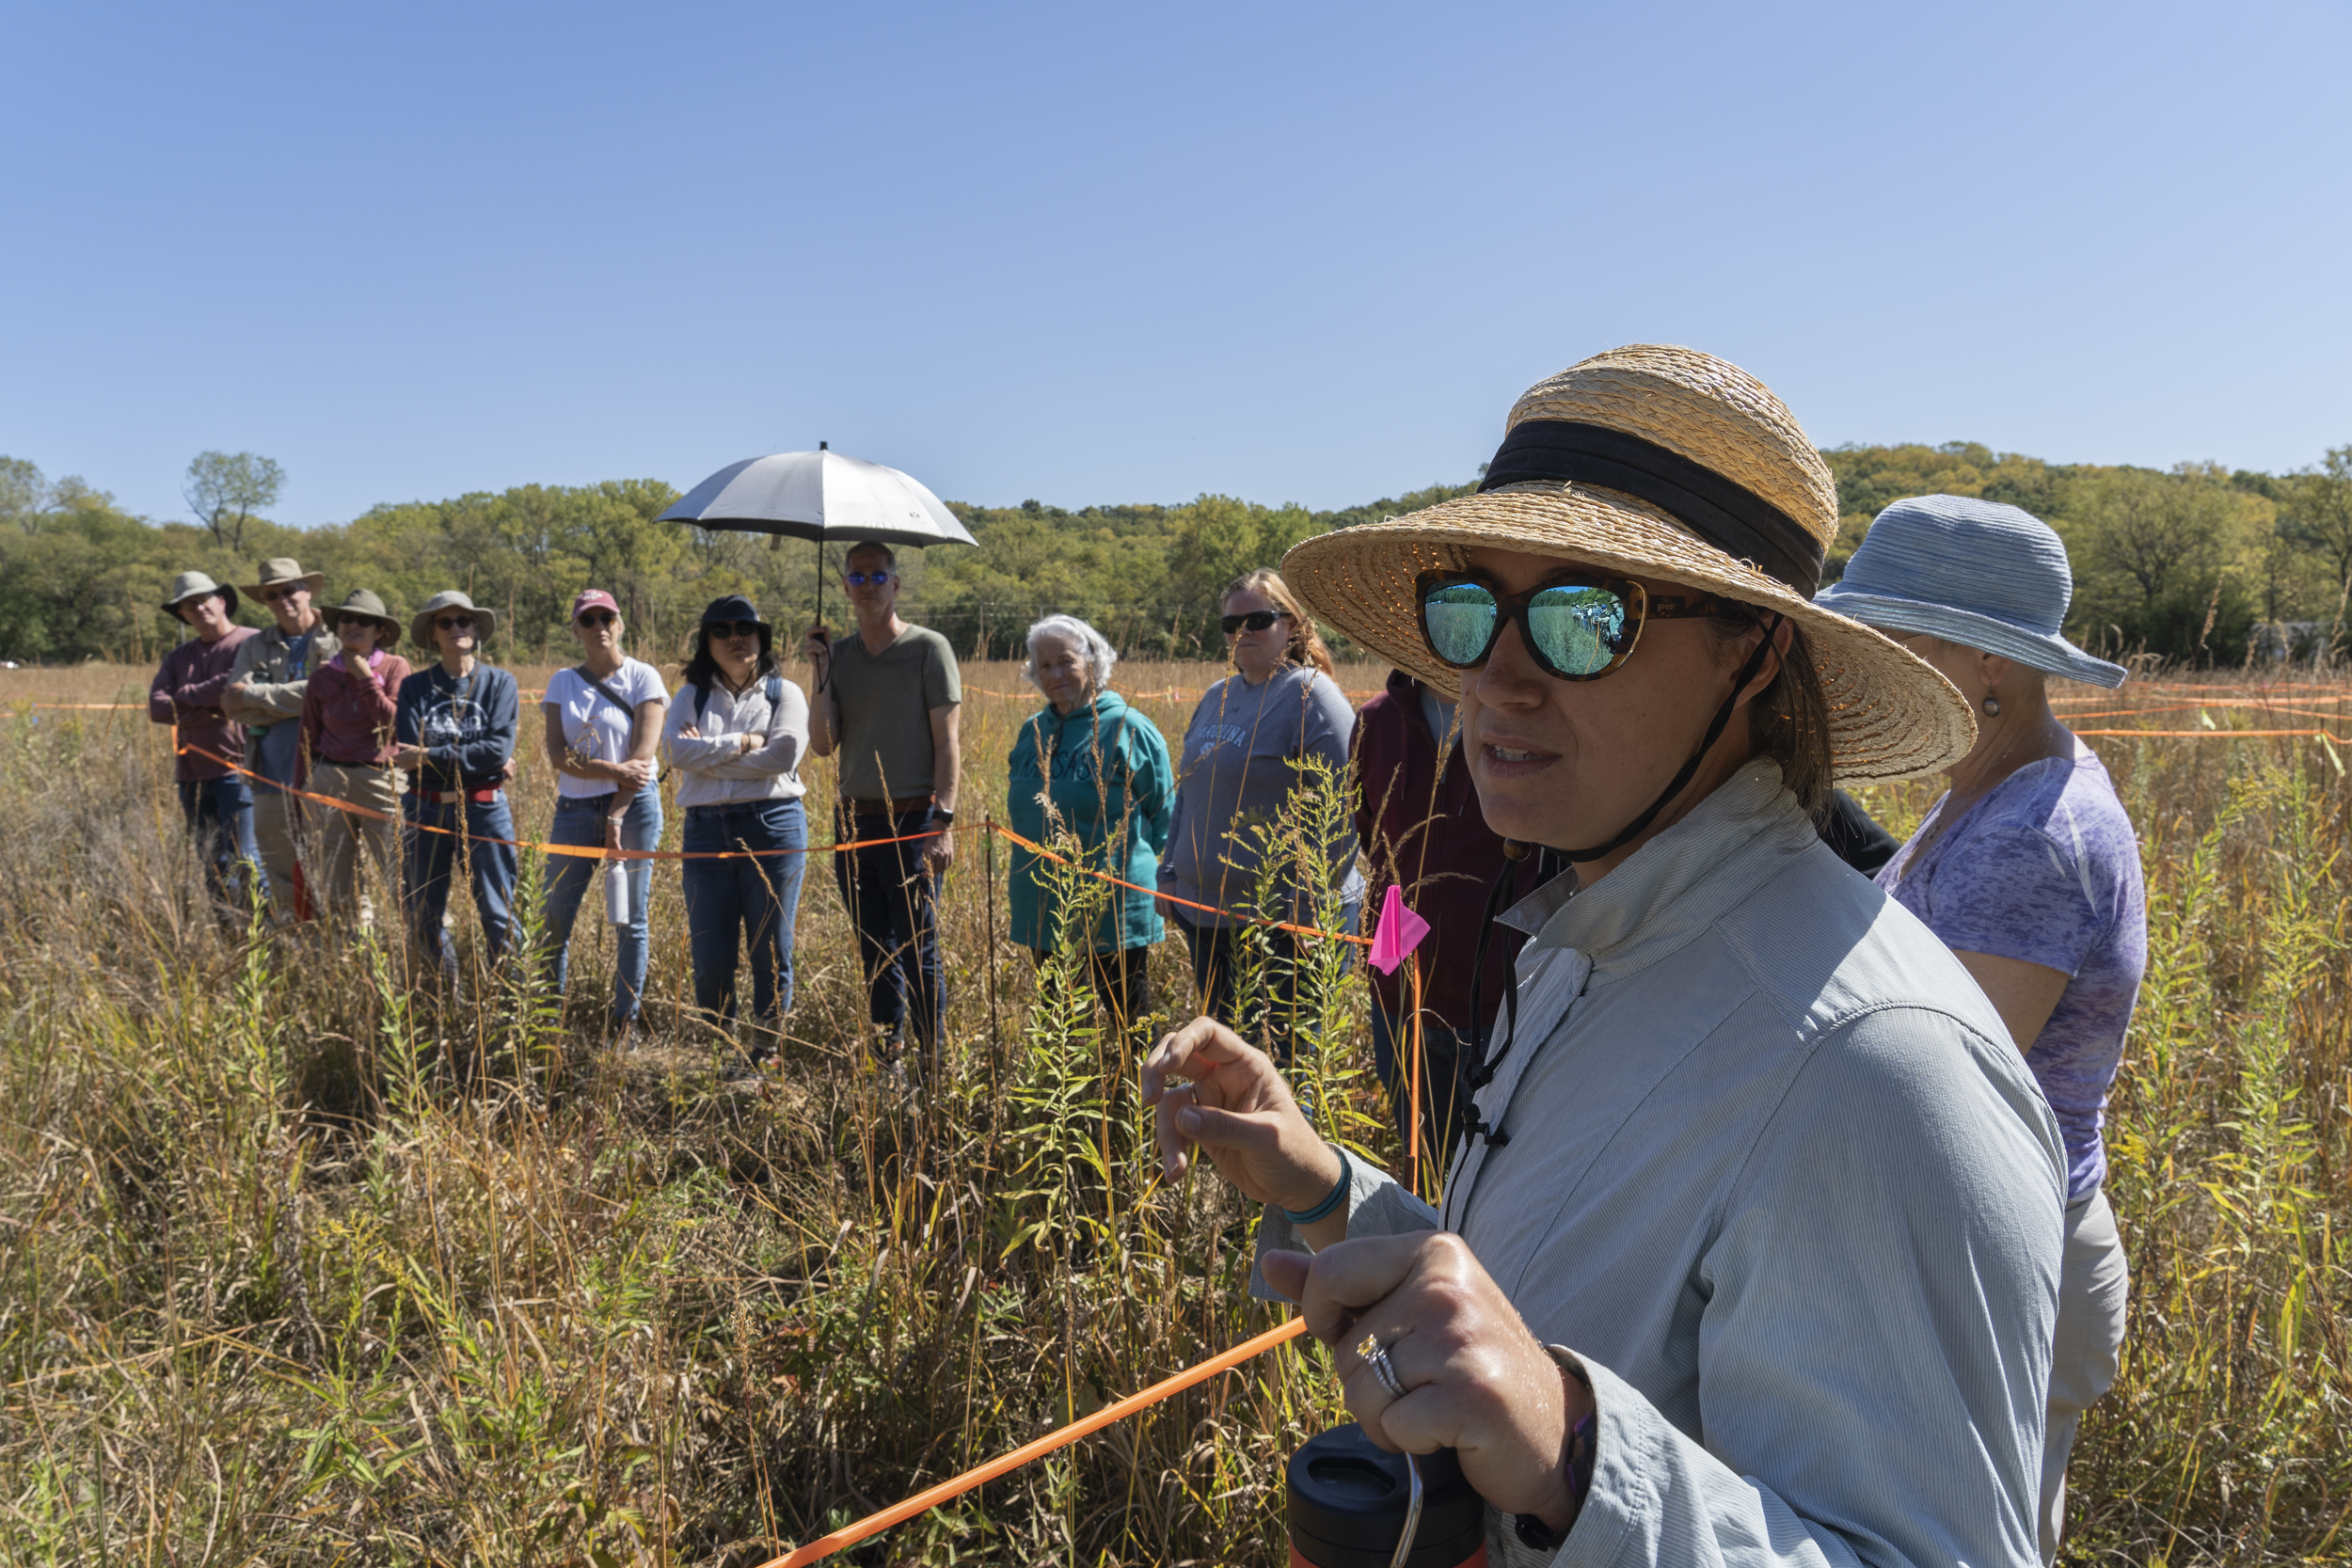 A white woman in a hat and sunglasses talks to a group of people in a field